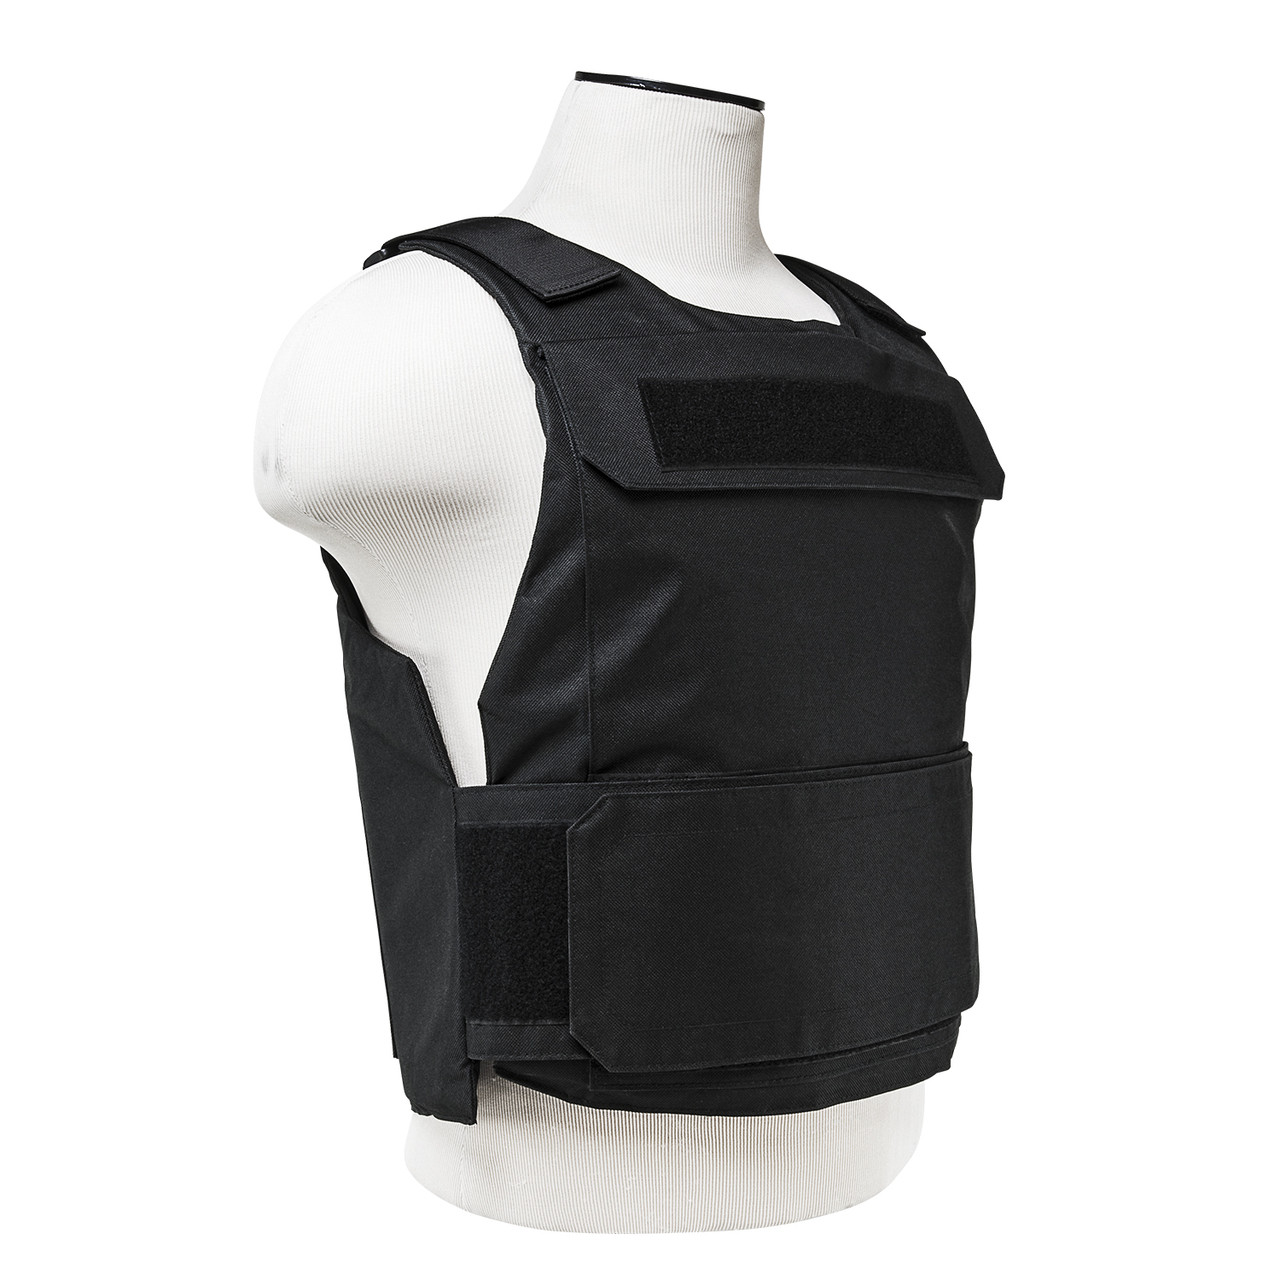 NcSTAR CVPCVDC2975B Discreet LE SWAT Police Low Profile Plate Carrier XS-Small